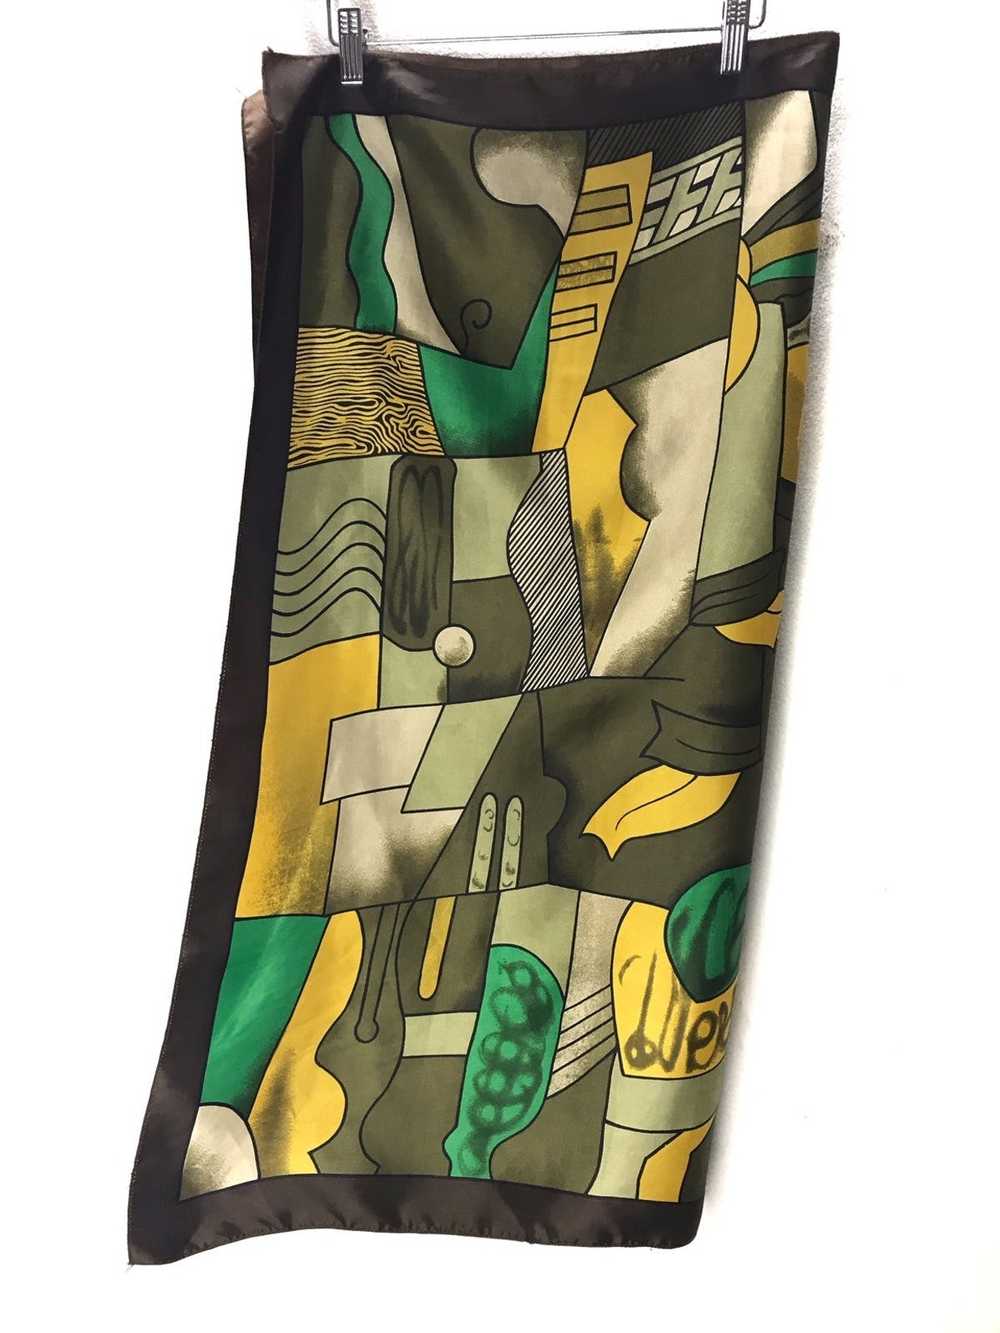 Picasso Vintage Japanese Brand Picasso scarf - image 5